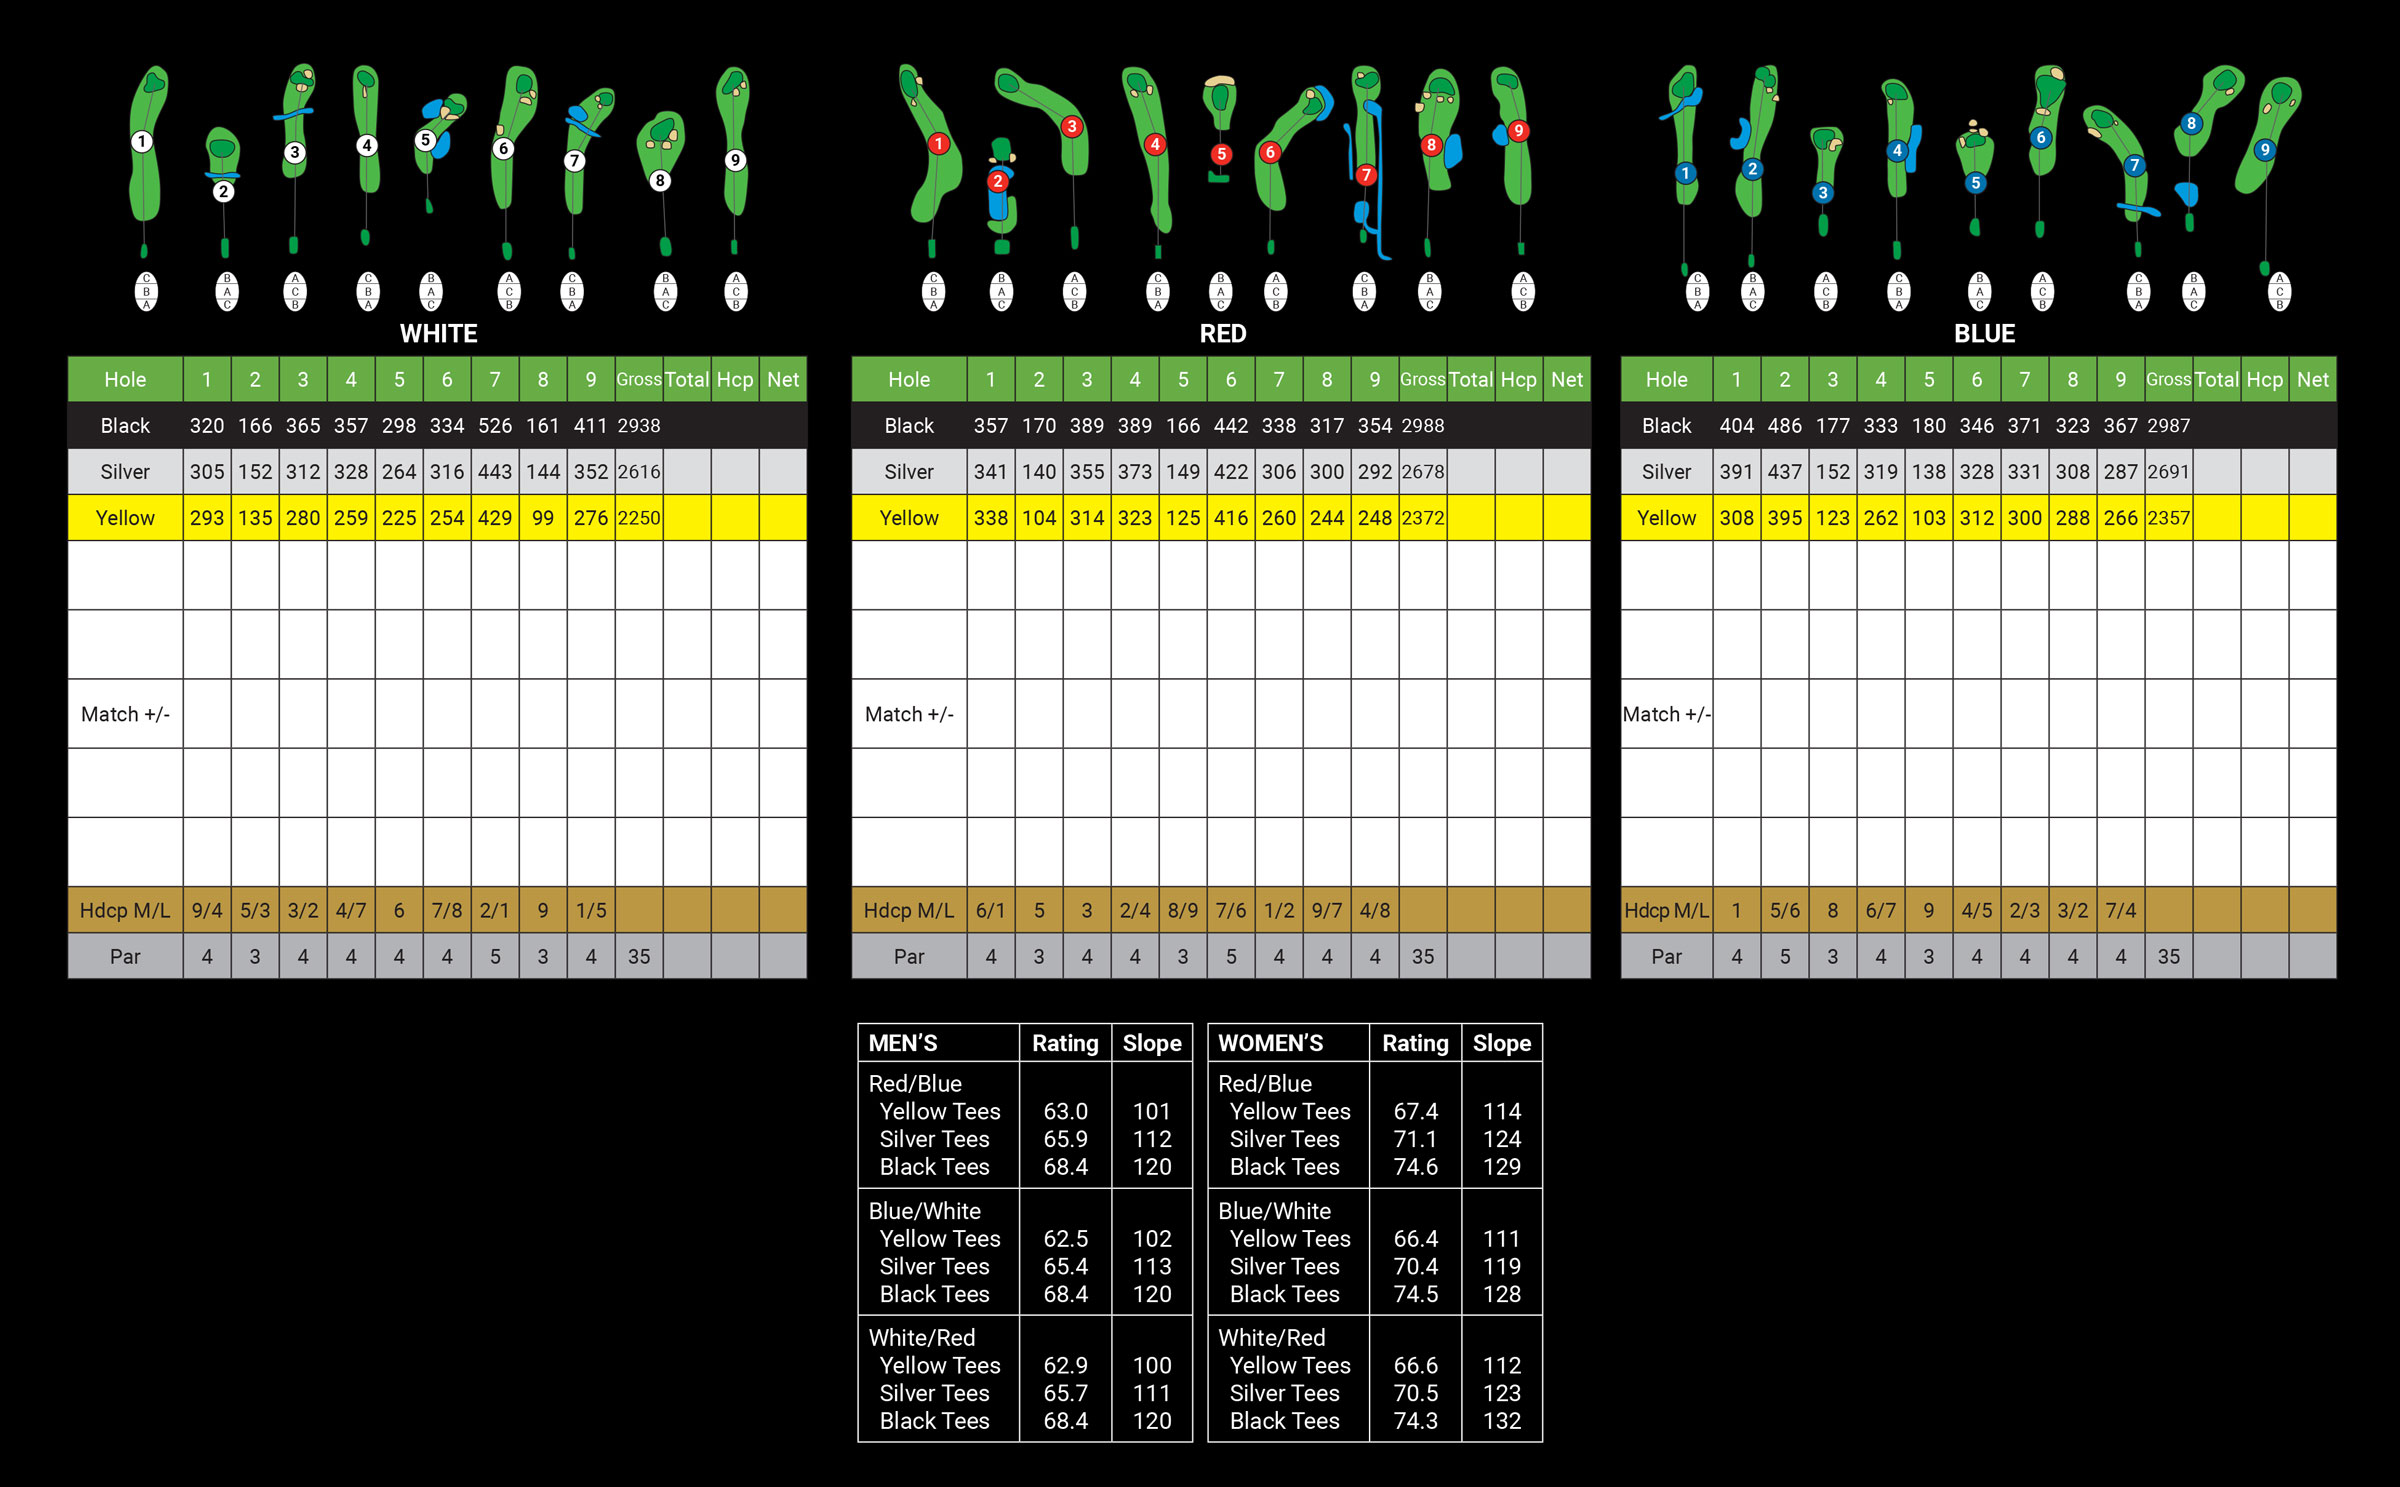 This is an image of Foxwood Golf Club's scorecard. For those who are visually impaired, please call 1-888-833-8787 for a representative to verbally guide you through the scorecard details.